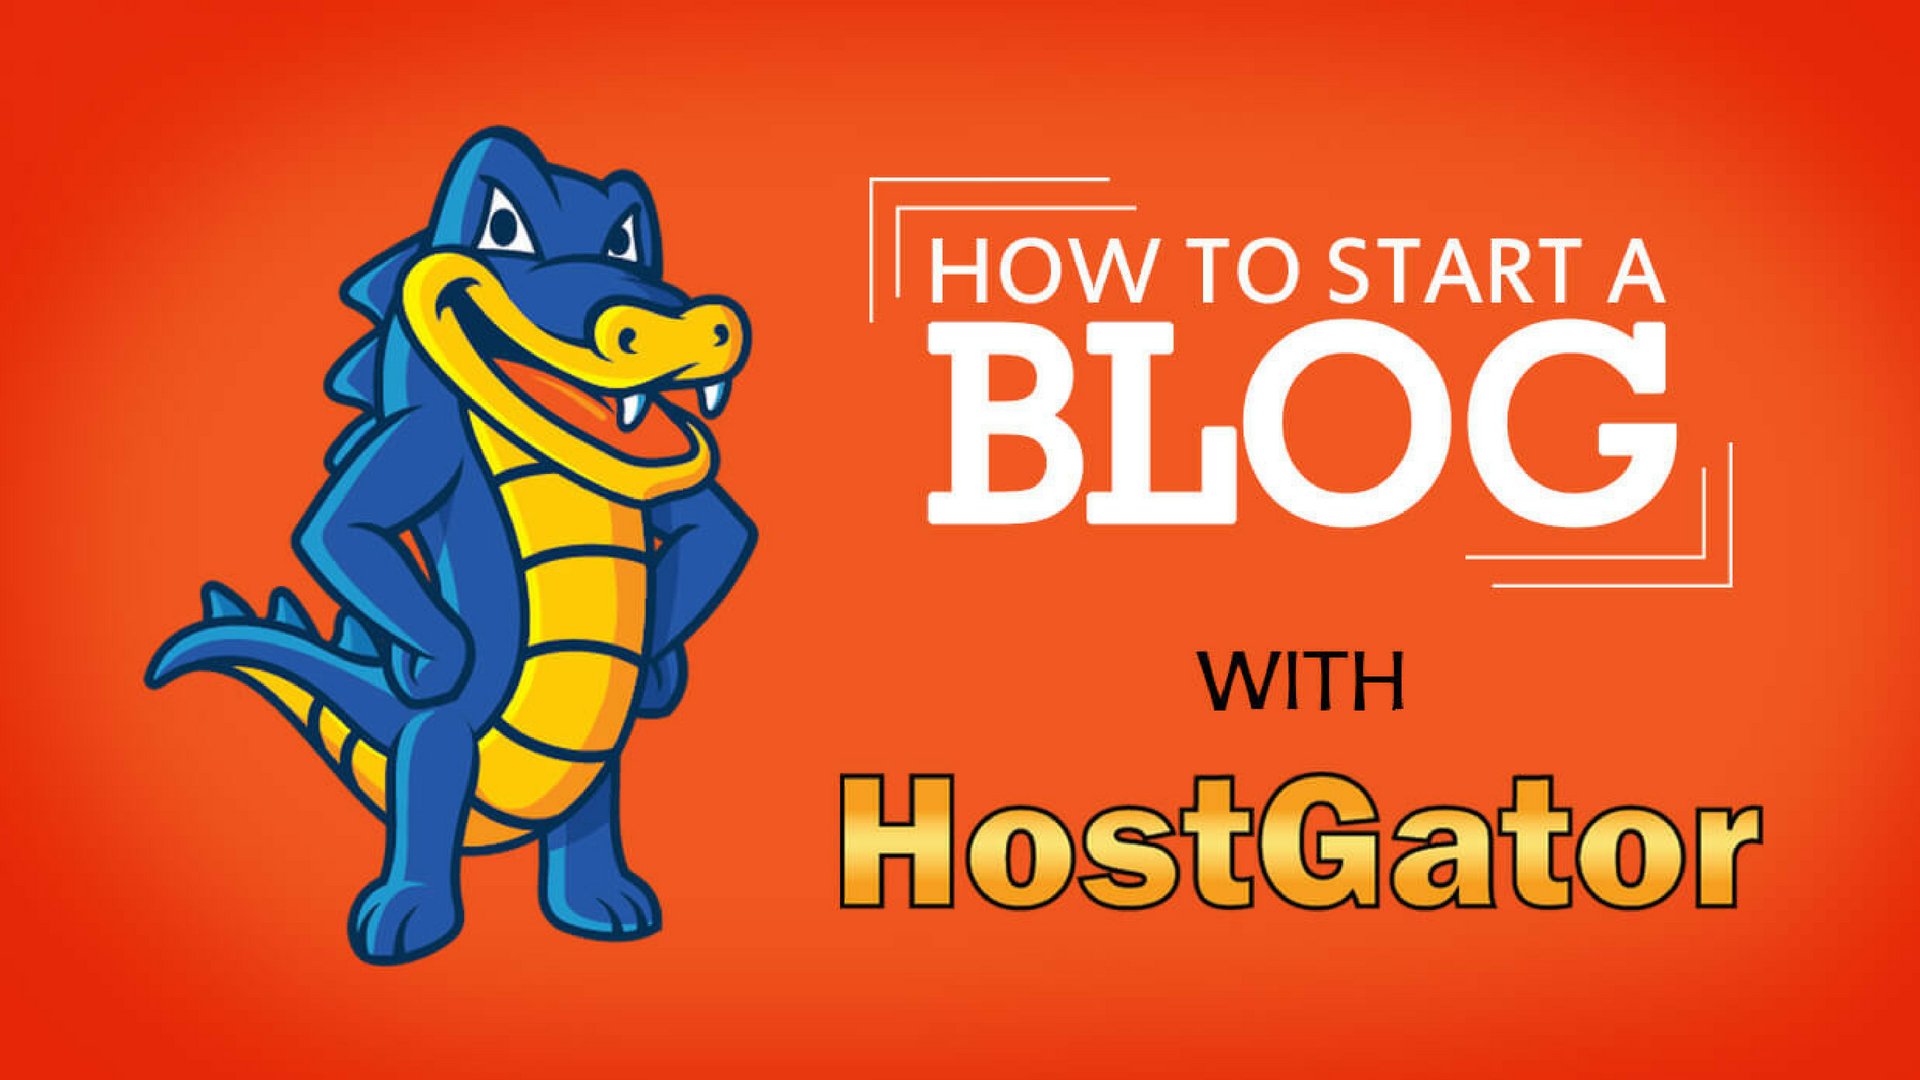 Buy Cheap And Best Web Hosting Services on HostGator